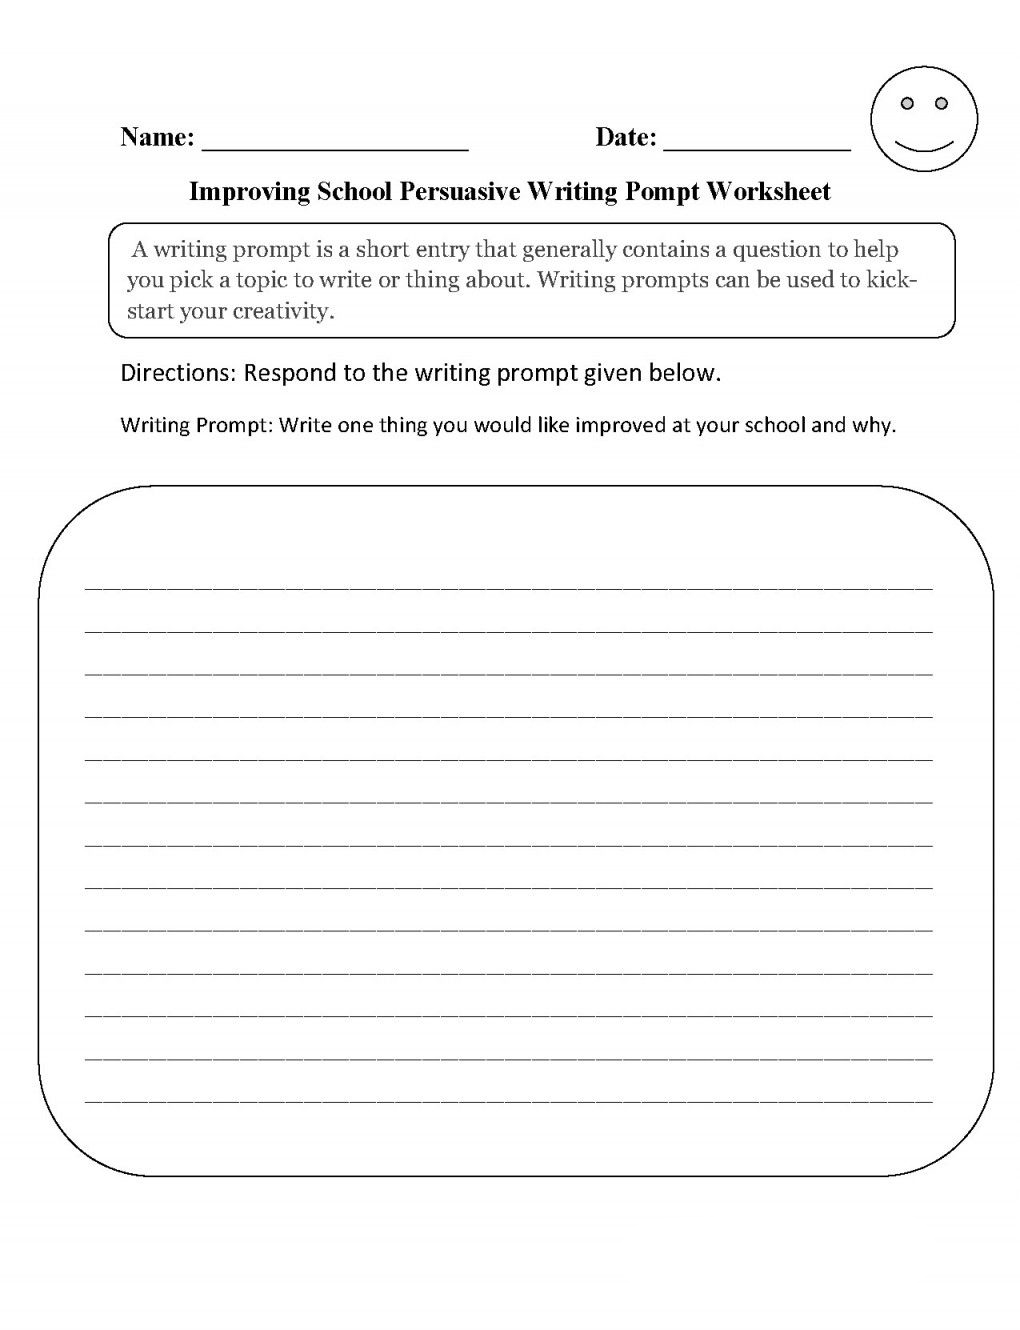 11rd Grade Writing Worksheets - Best Coloring Pages For Kids With Third Grade Writing Worksheet